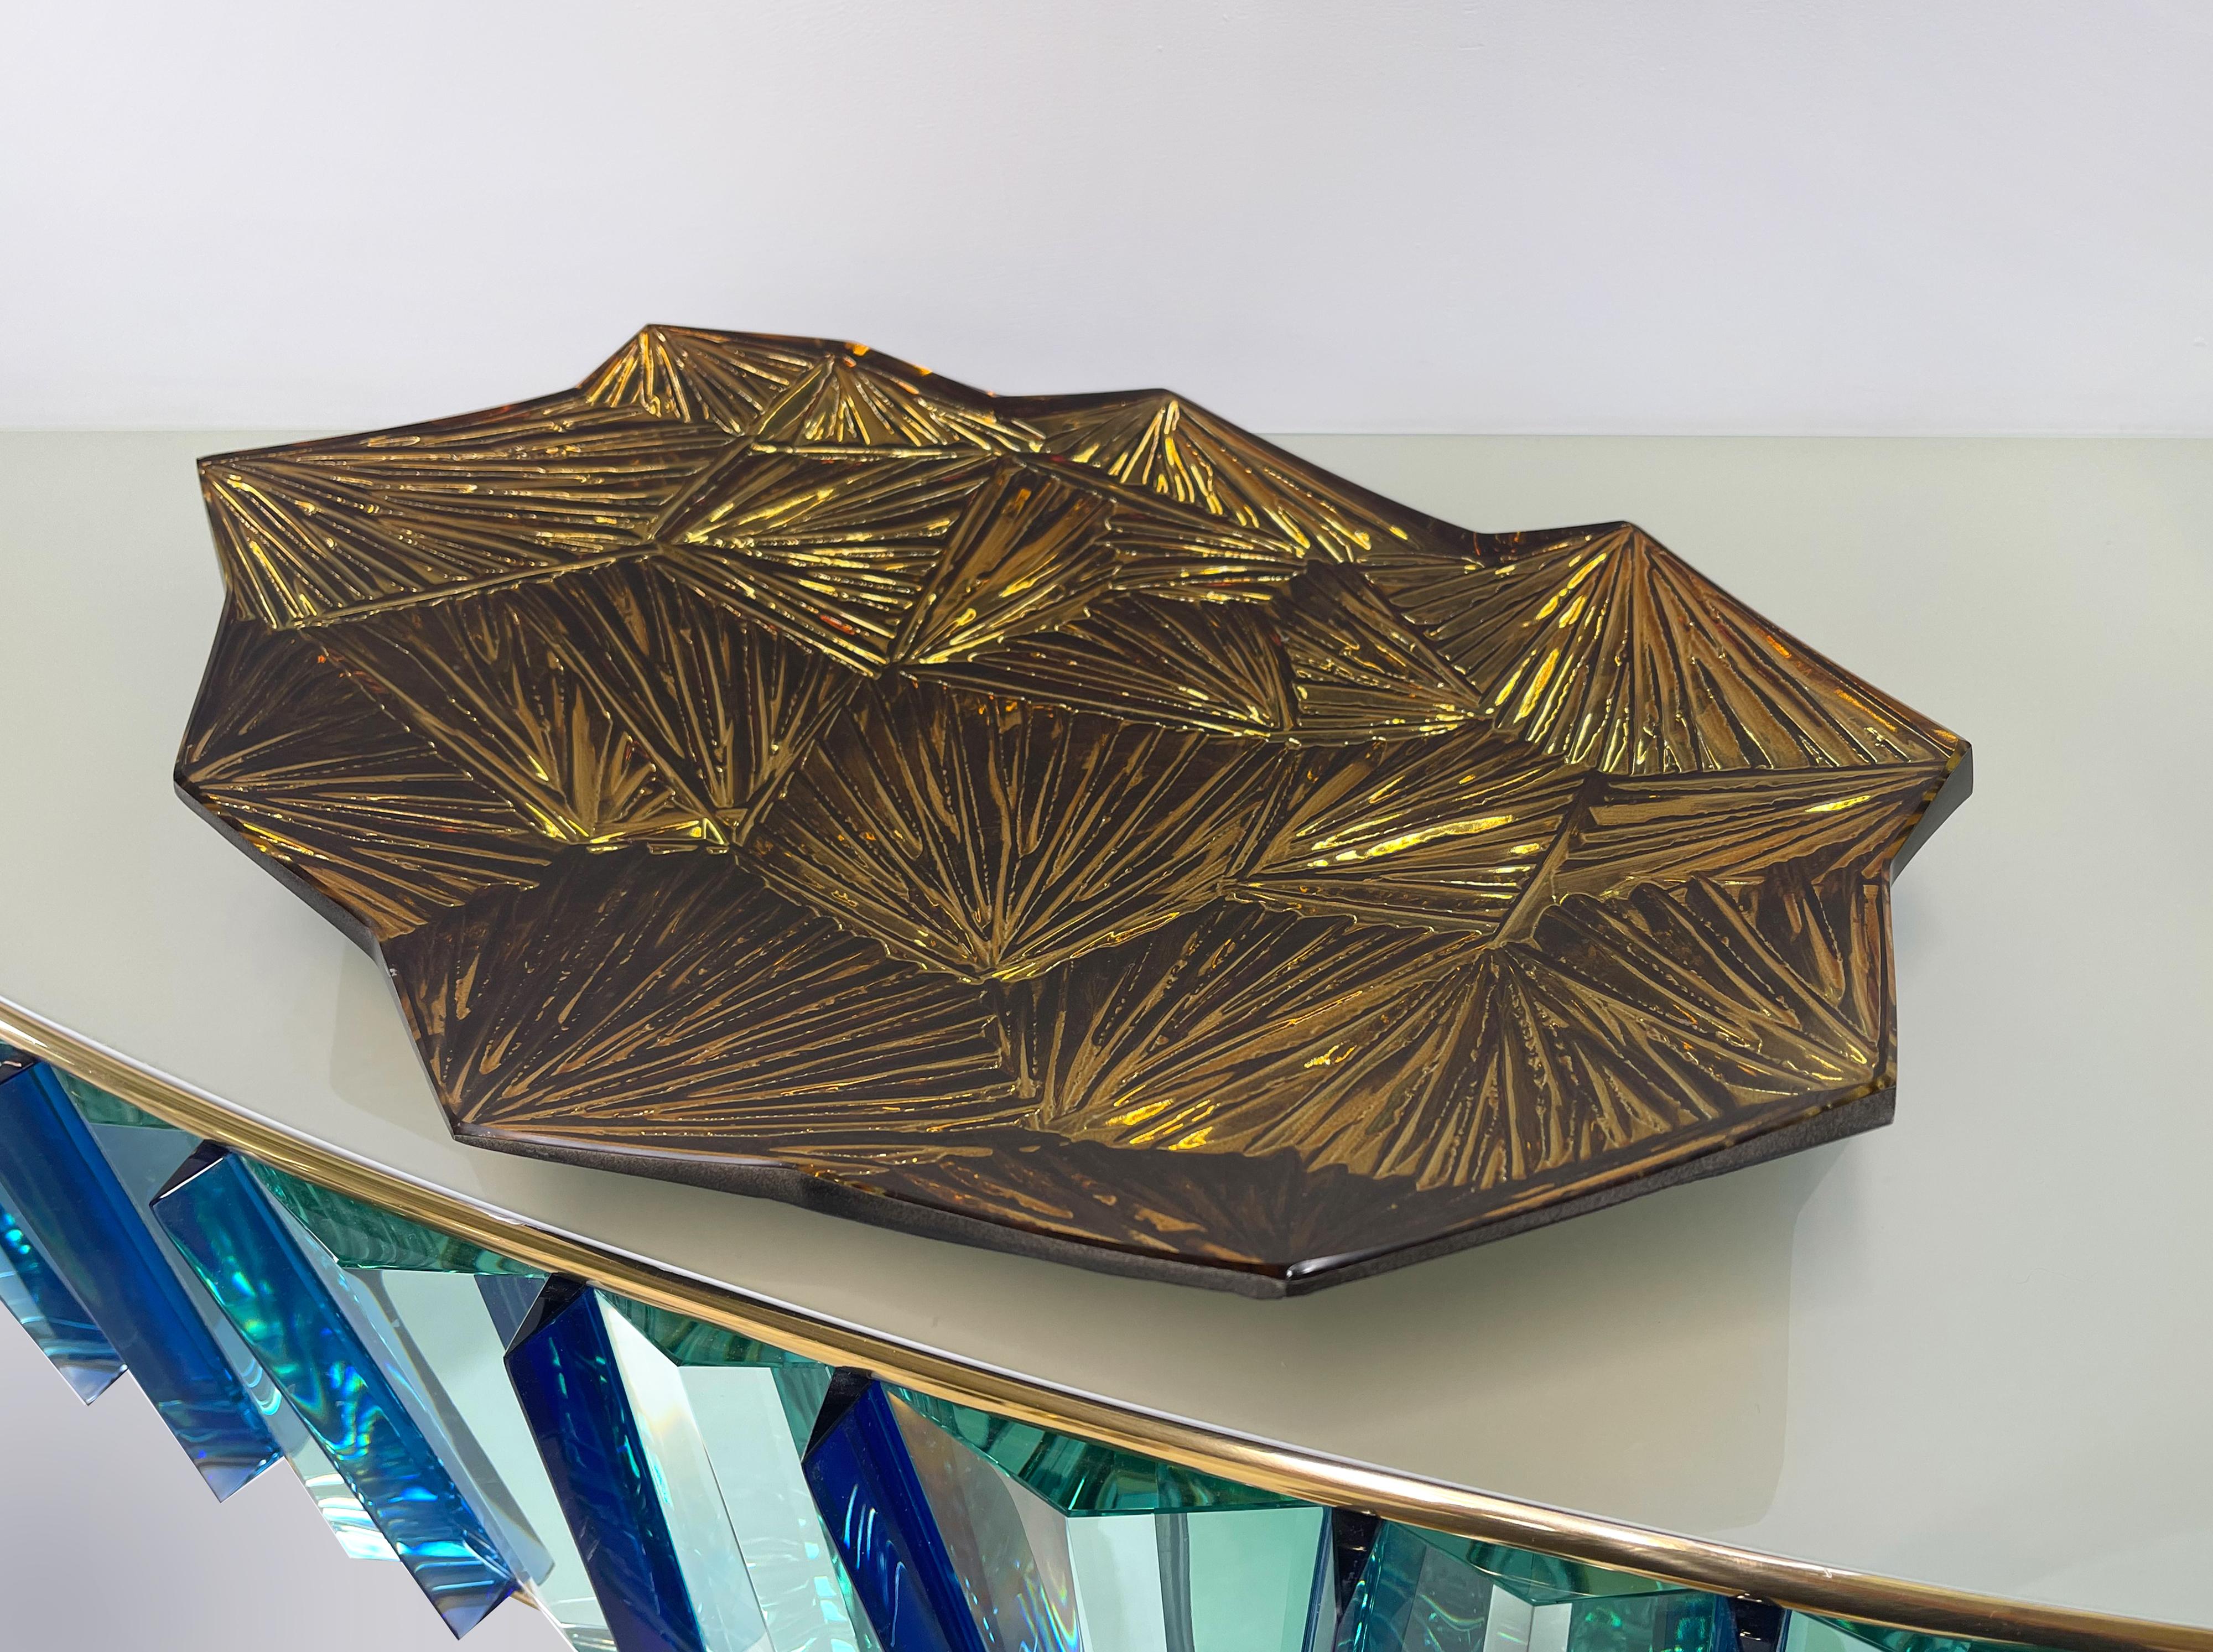 2021 Collection of artistic bowls by Ghirò Studio (Italy).
'Amber' is not only a innovative, elegant and raffinated bowl but it is a very artistic sculpture.
Every sign is hand made engraved and and to achieve this result several hours of work and